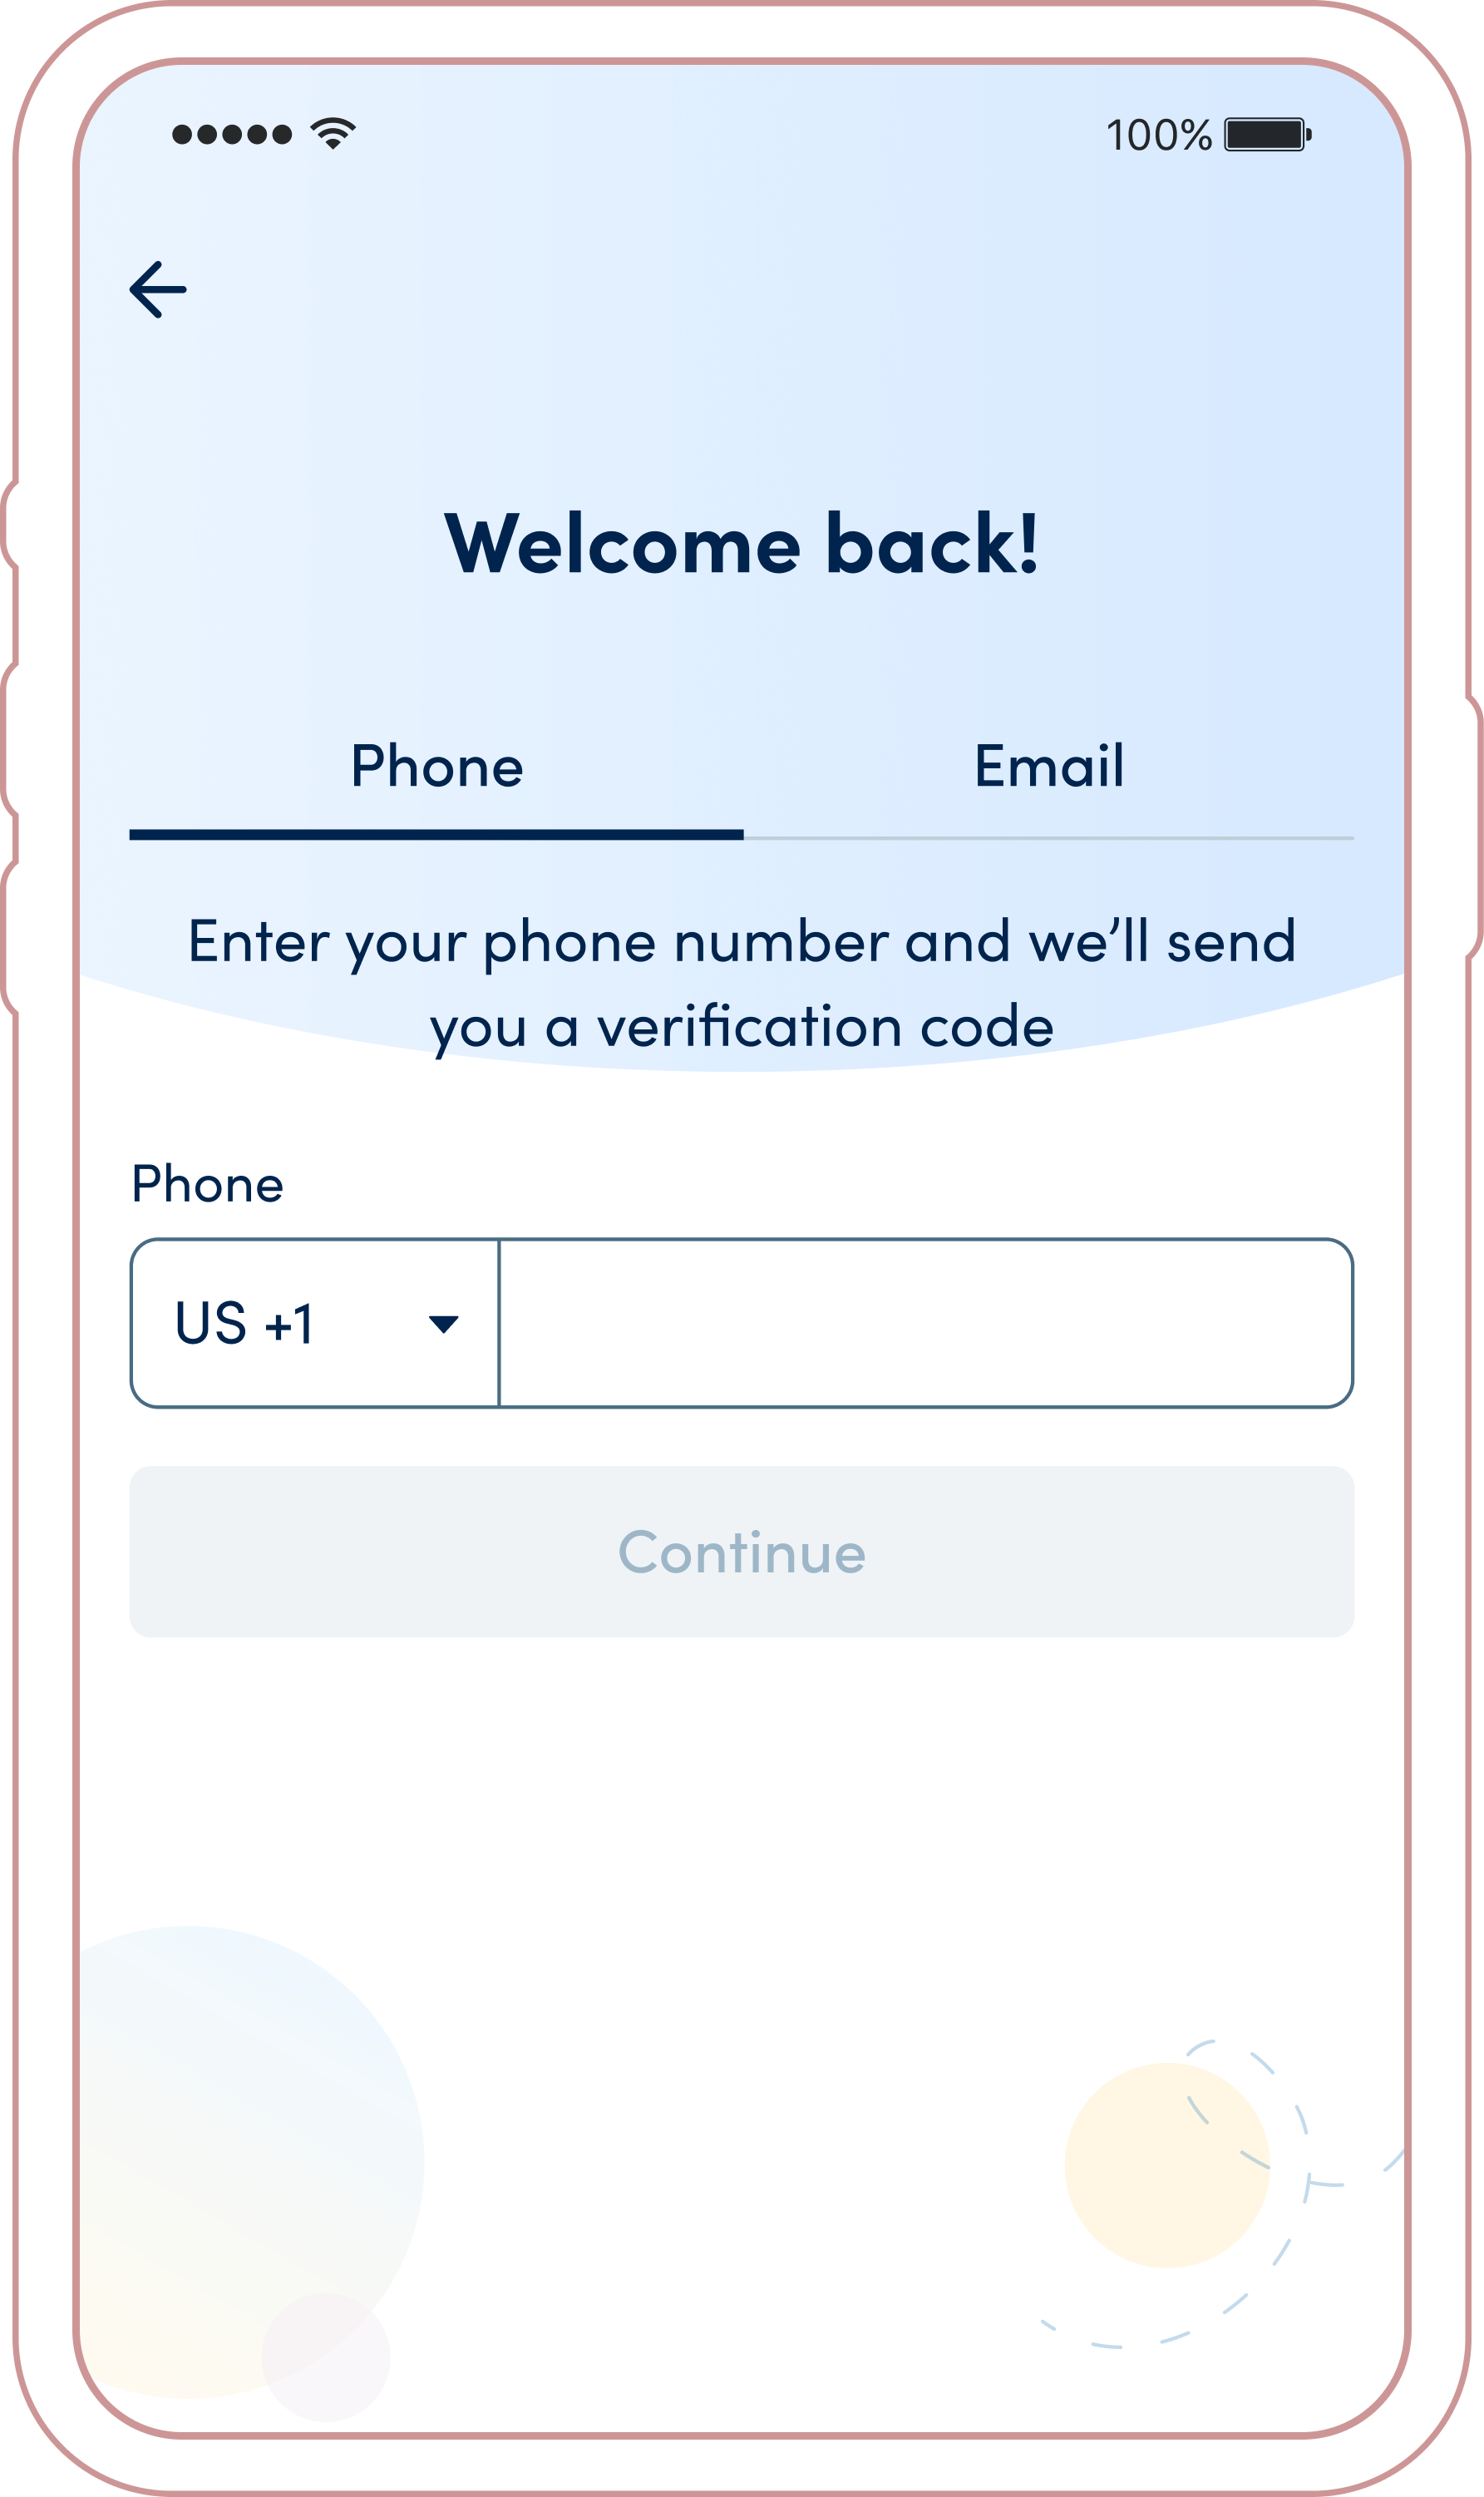 Phone Number Sign In screen for returning users in the K Health app